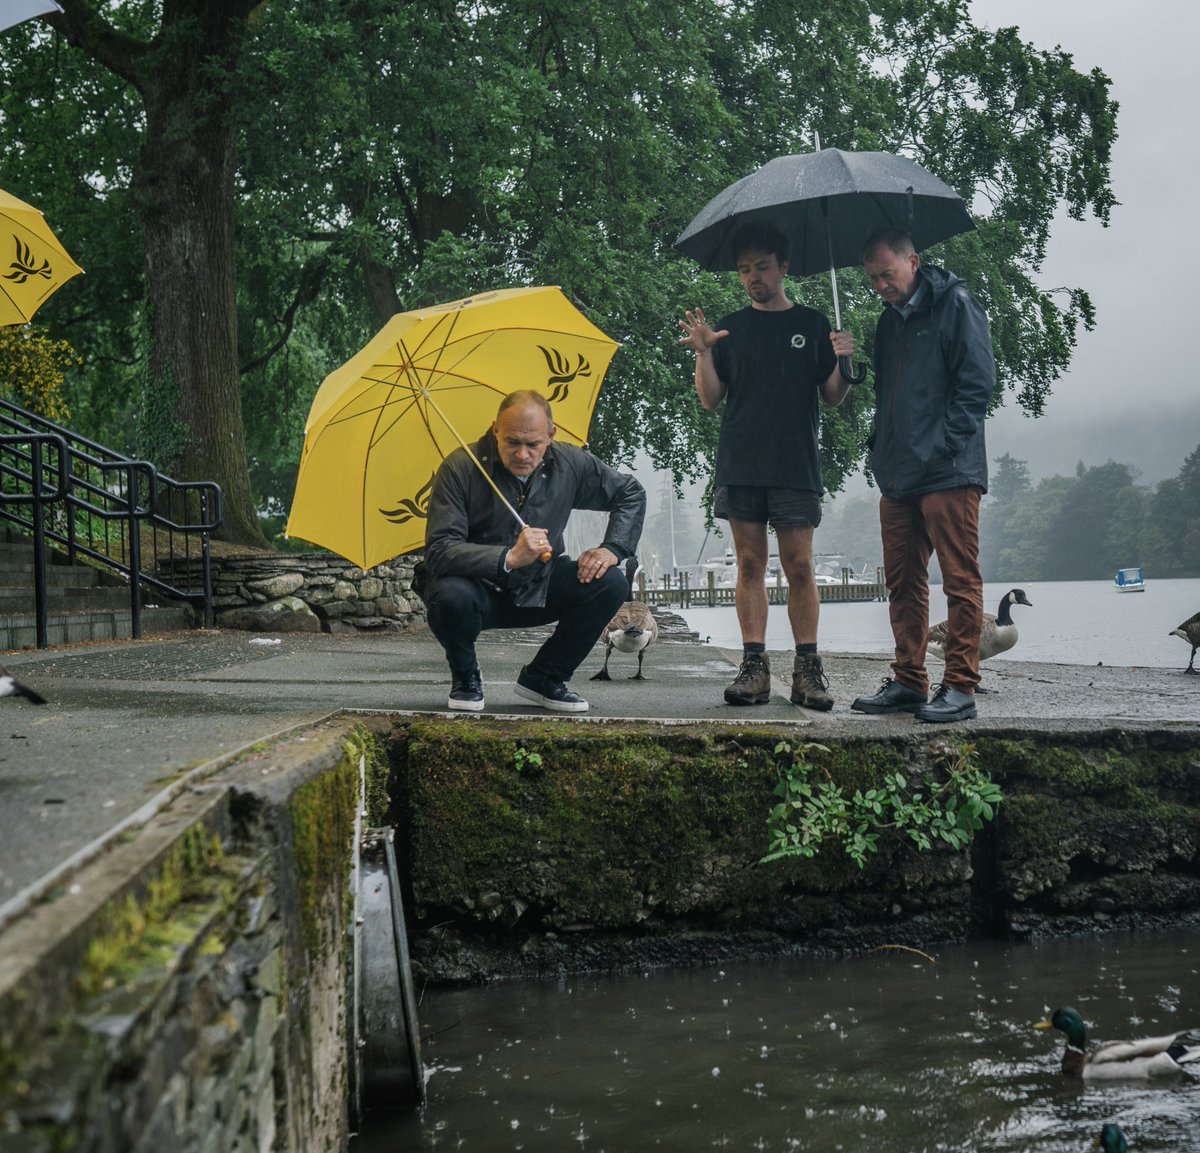 Although we politely declined the offer to join @LibDems leader @EdwardJDavey and @timfarron paddle boarding in the p*ssing rain, we did take Ed to see one of the pipes from which United Utilities dumps sewage into Windermere. 

Most importantly we gave him our ‘Plan to Save